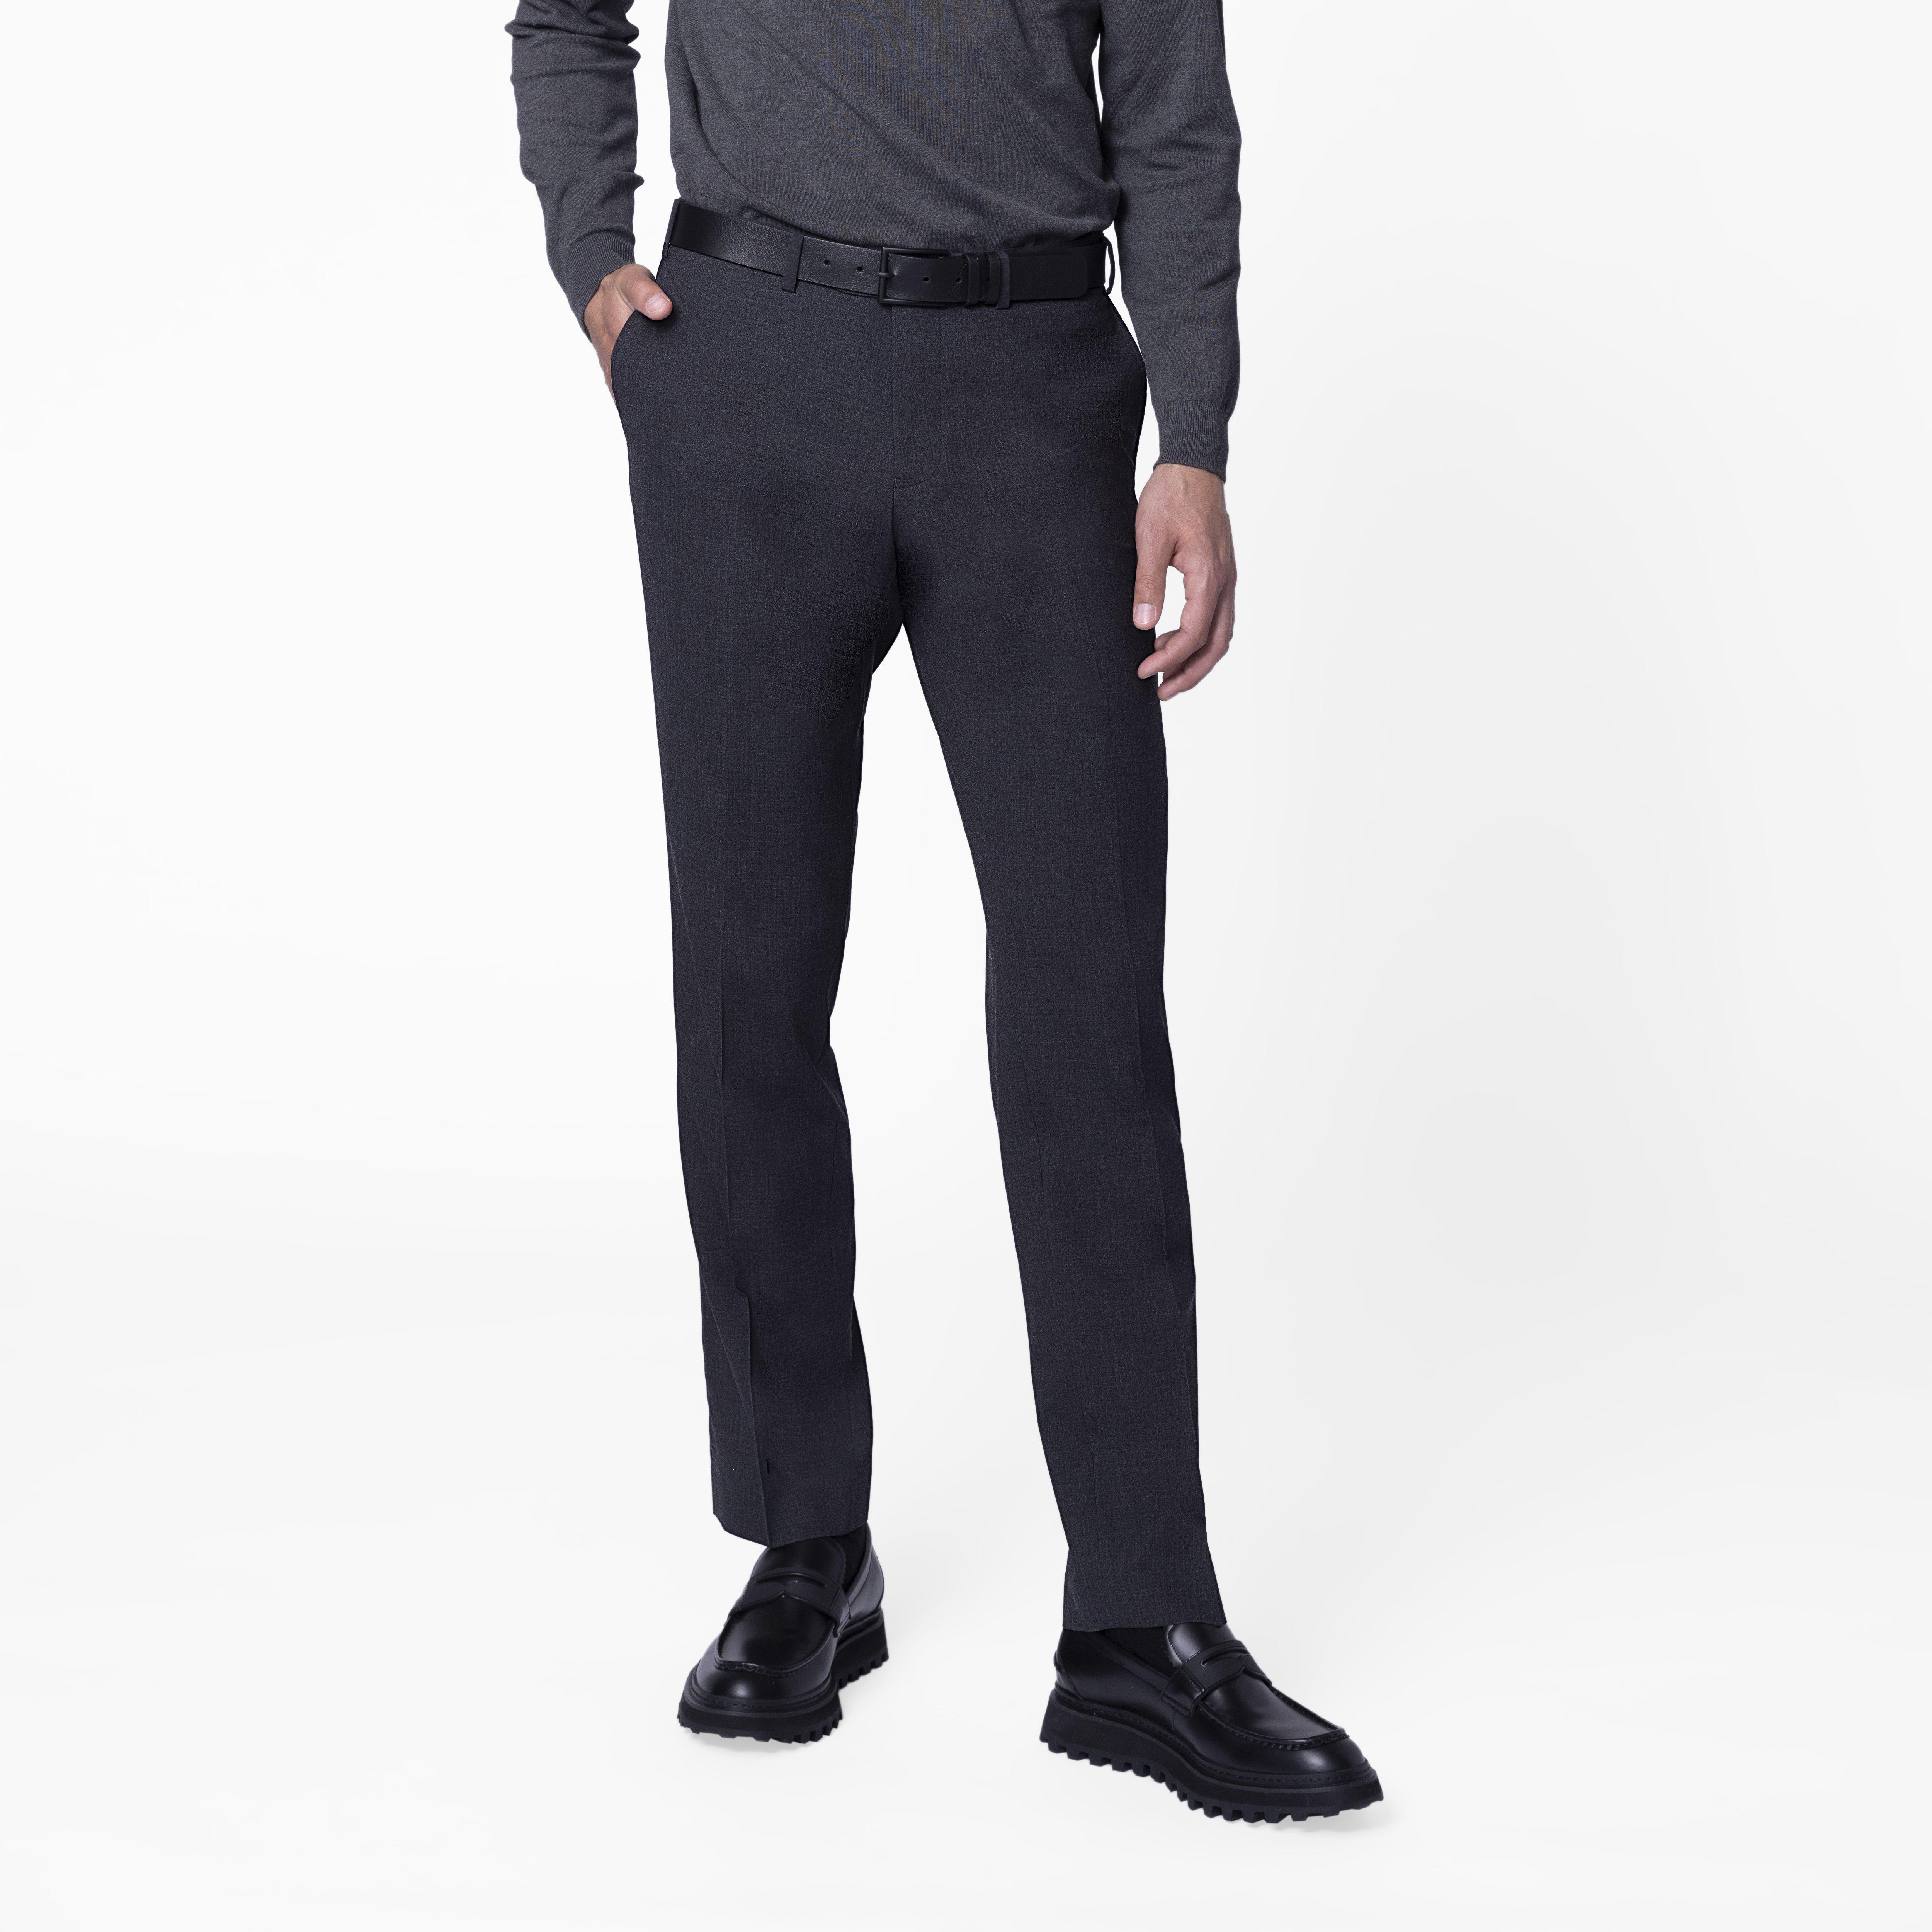 Custom Suits Made For You - Howell Wool Stretch Charcoal Suit | INDOCHINO